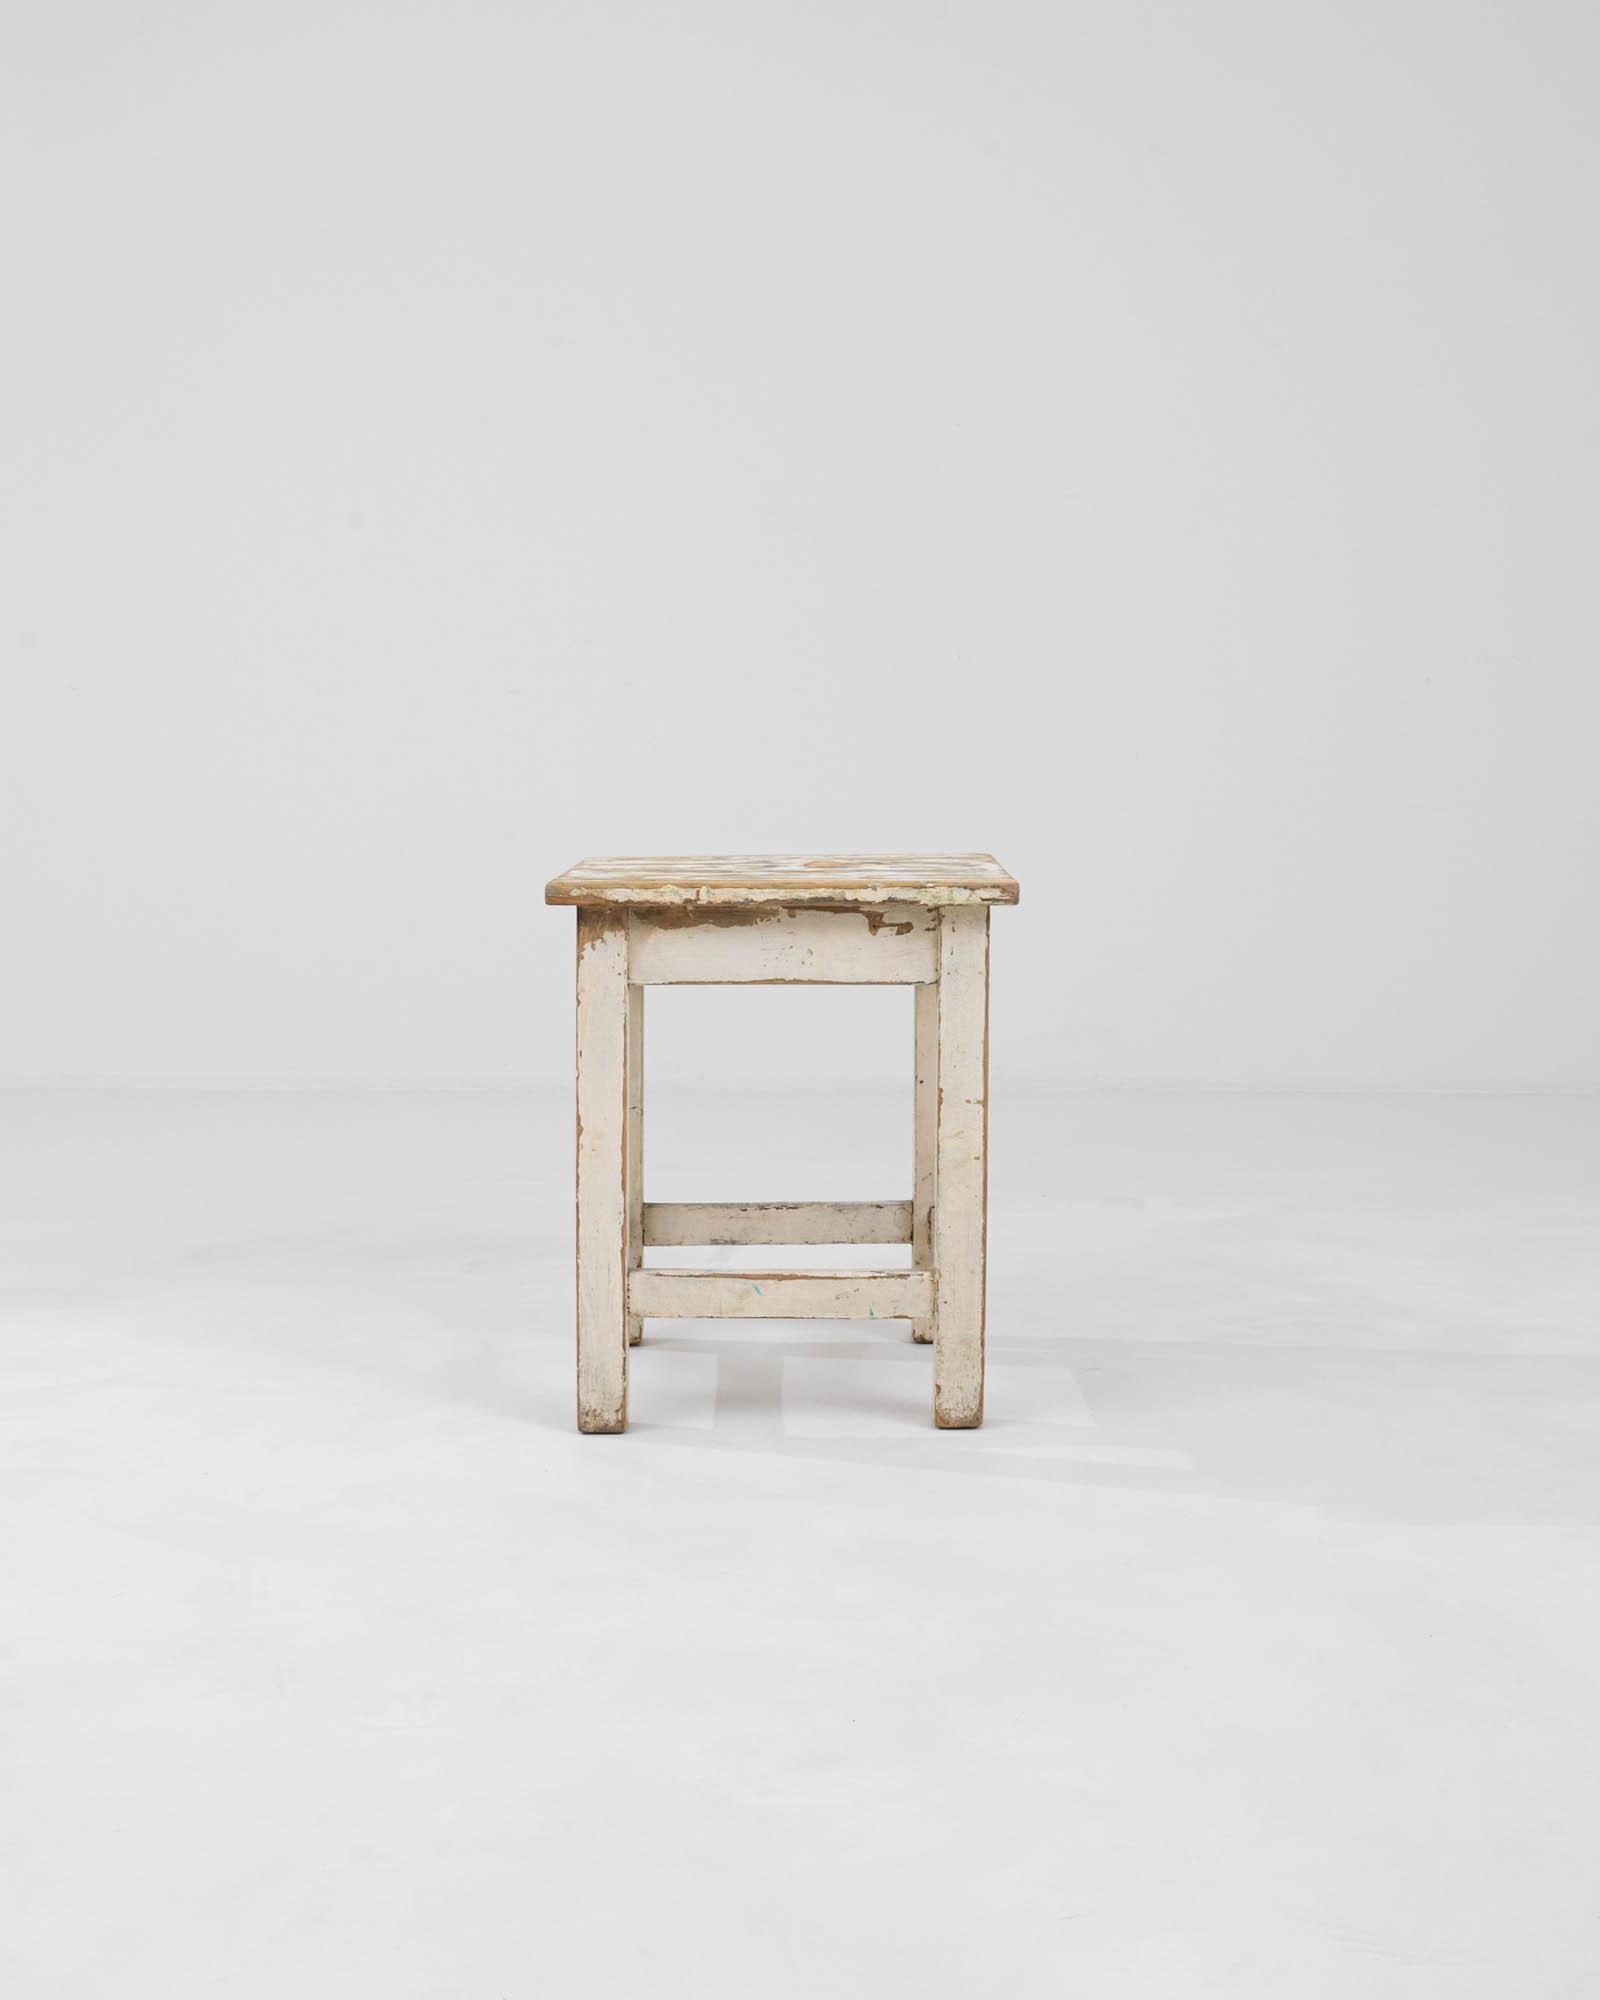 This Early 20th Century Central European stool captures the essence of a bygone era with its richly patinated wood and chipped paint finish. Each mark and scratch on its surface narrates the tale of its long-standing service and adds to its unique